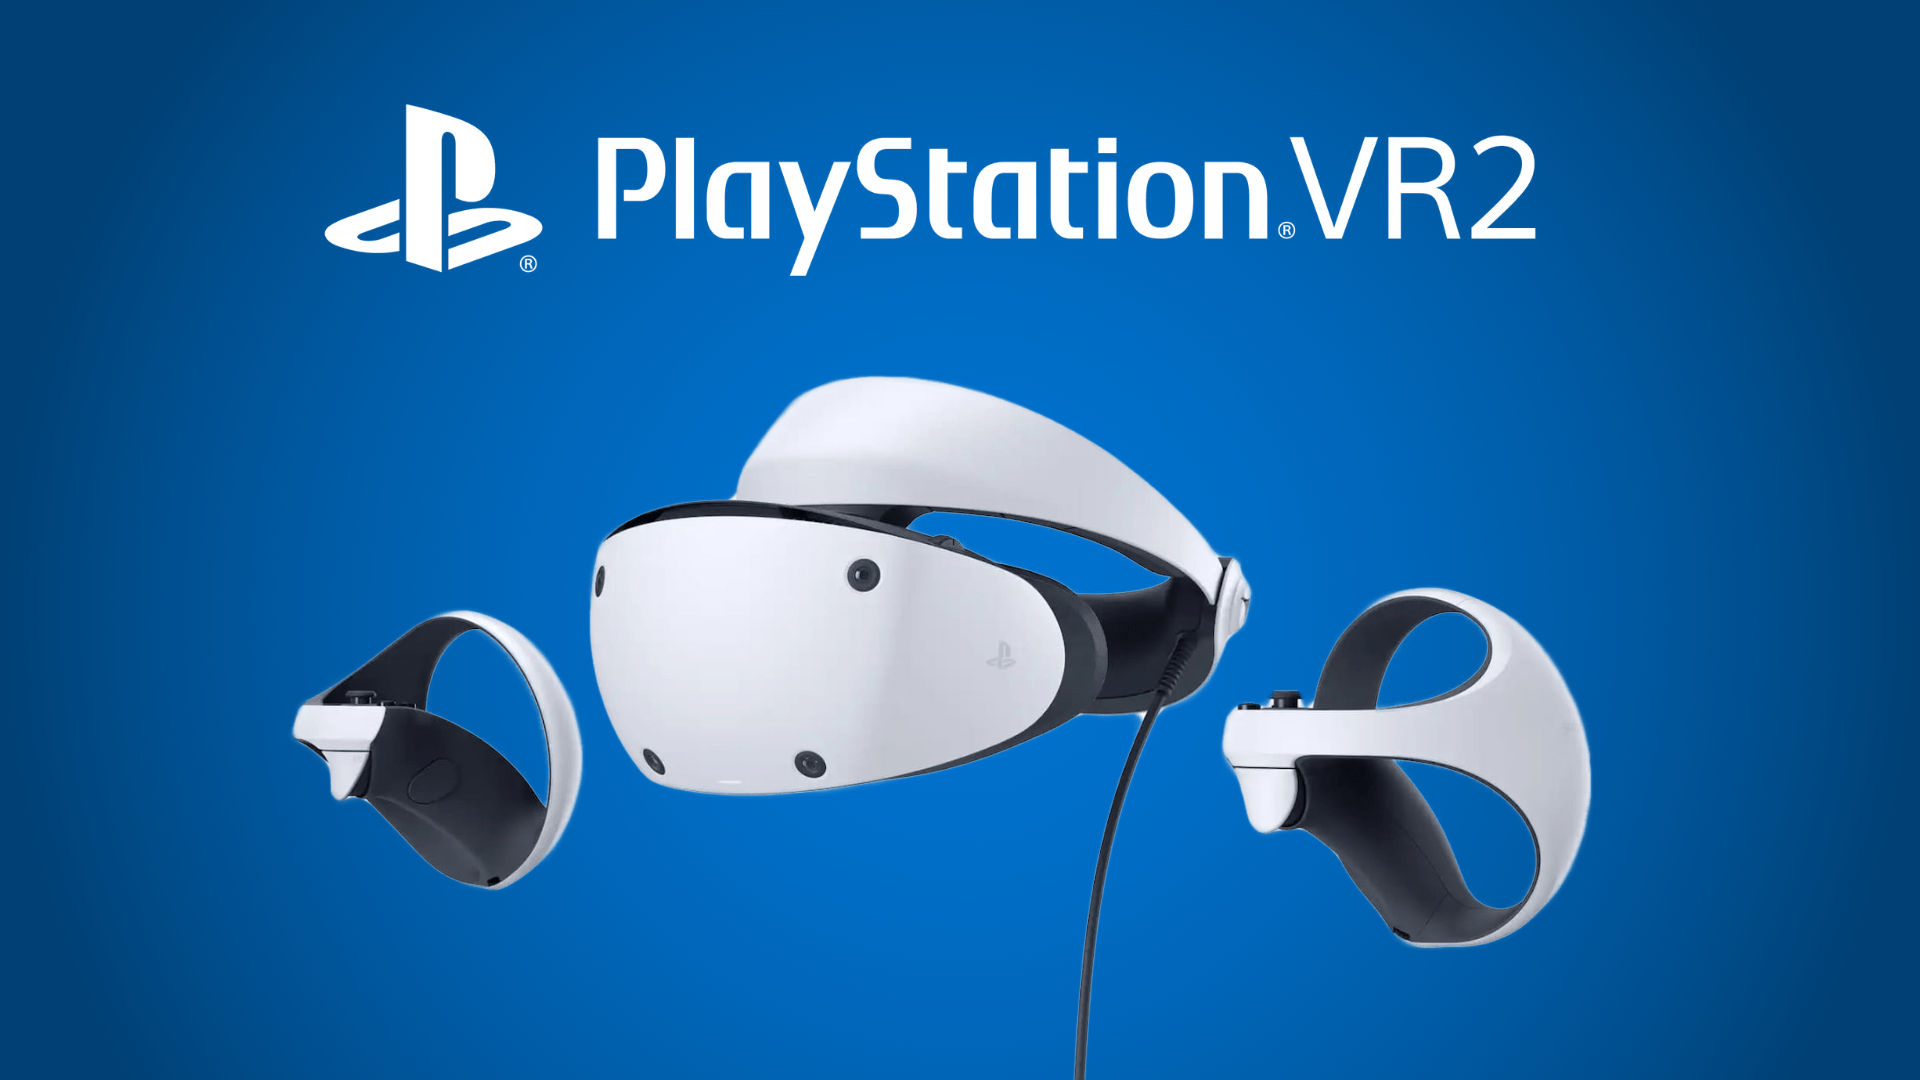 Playstation VR 2: Release, resolution, controller - all you need